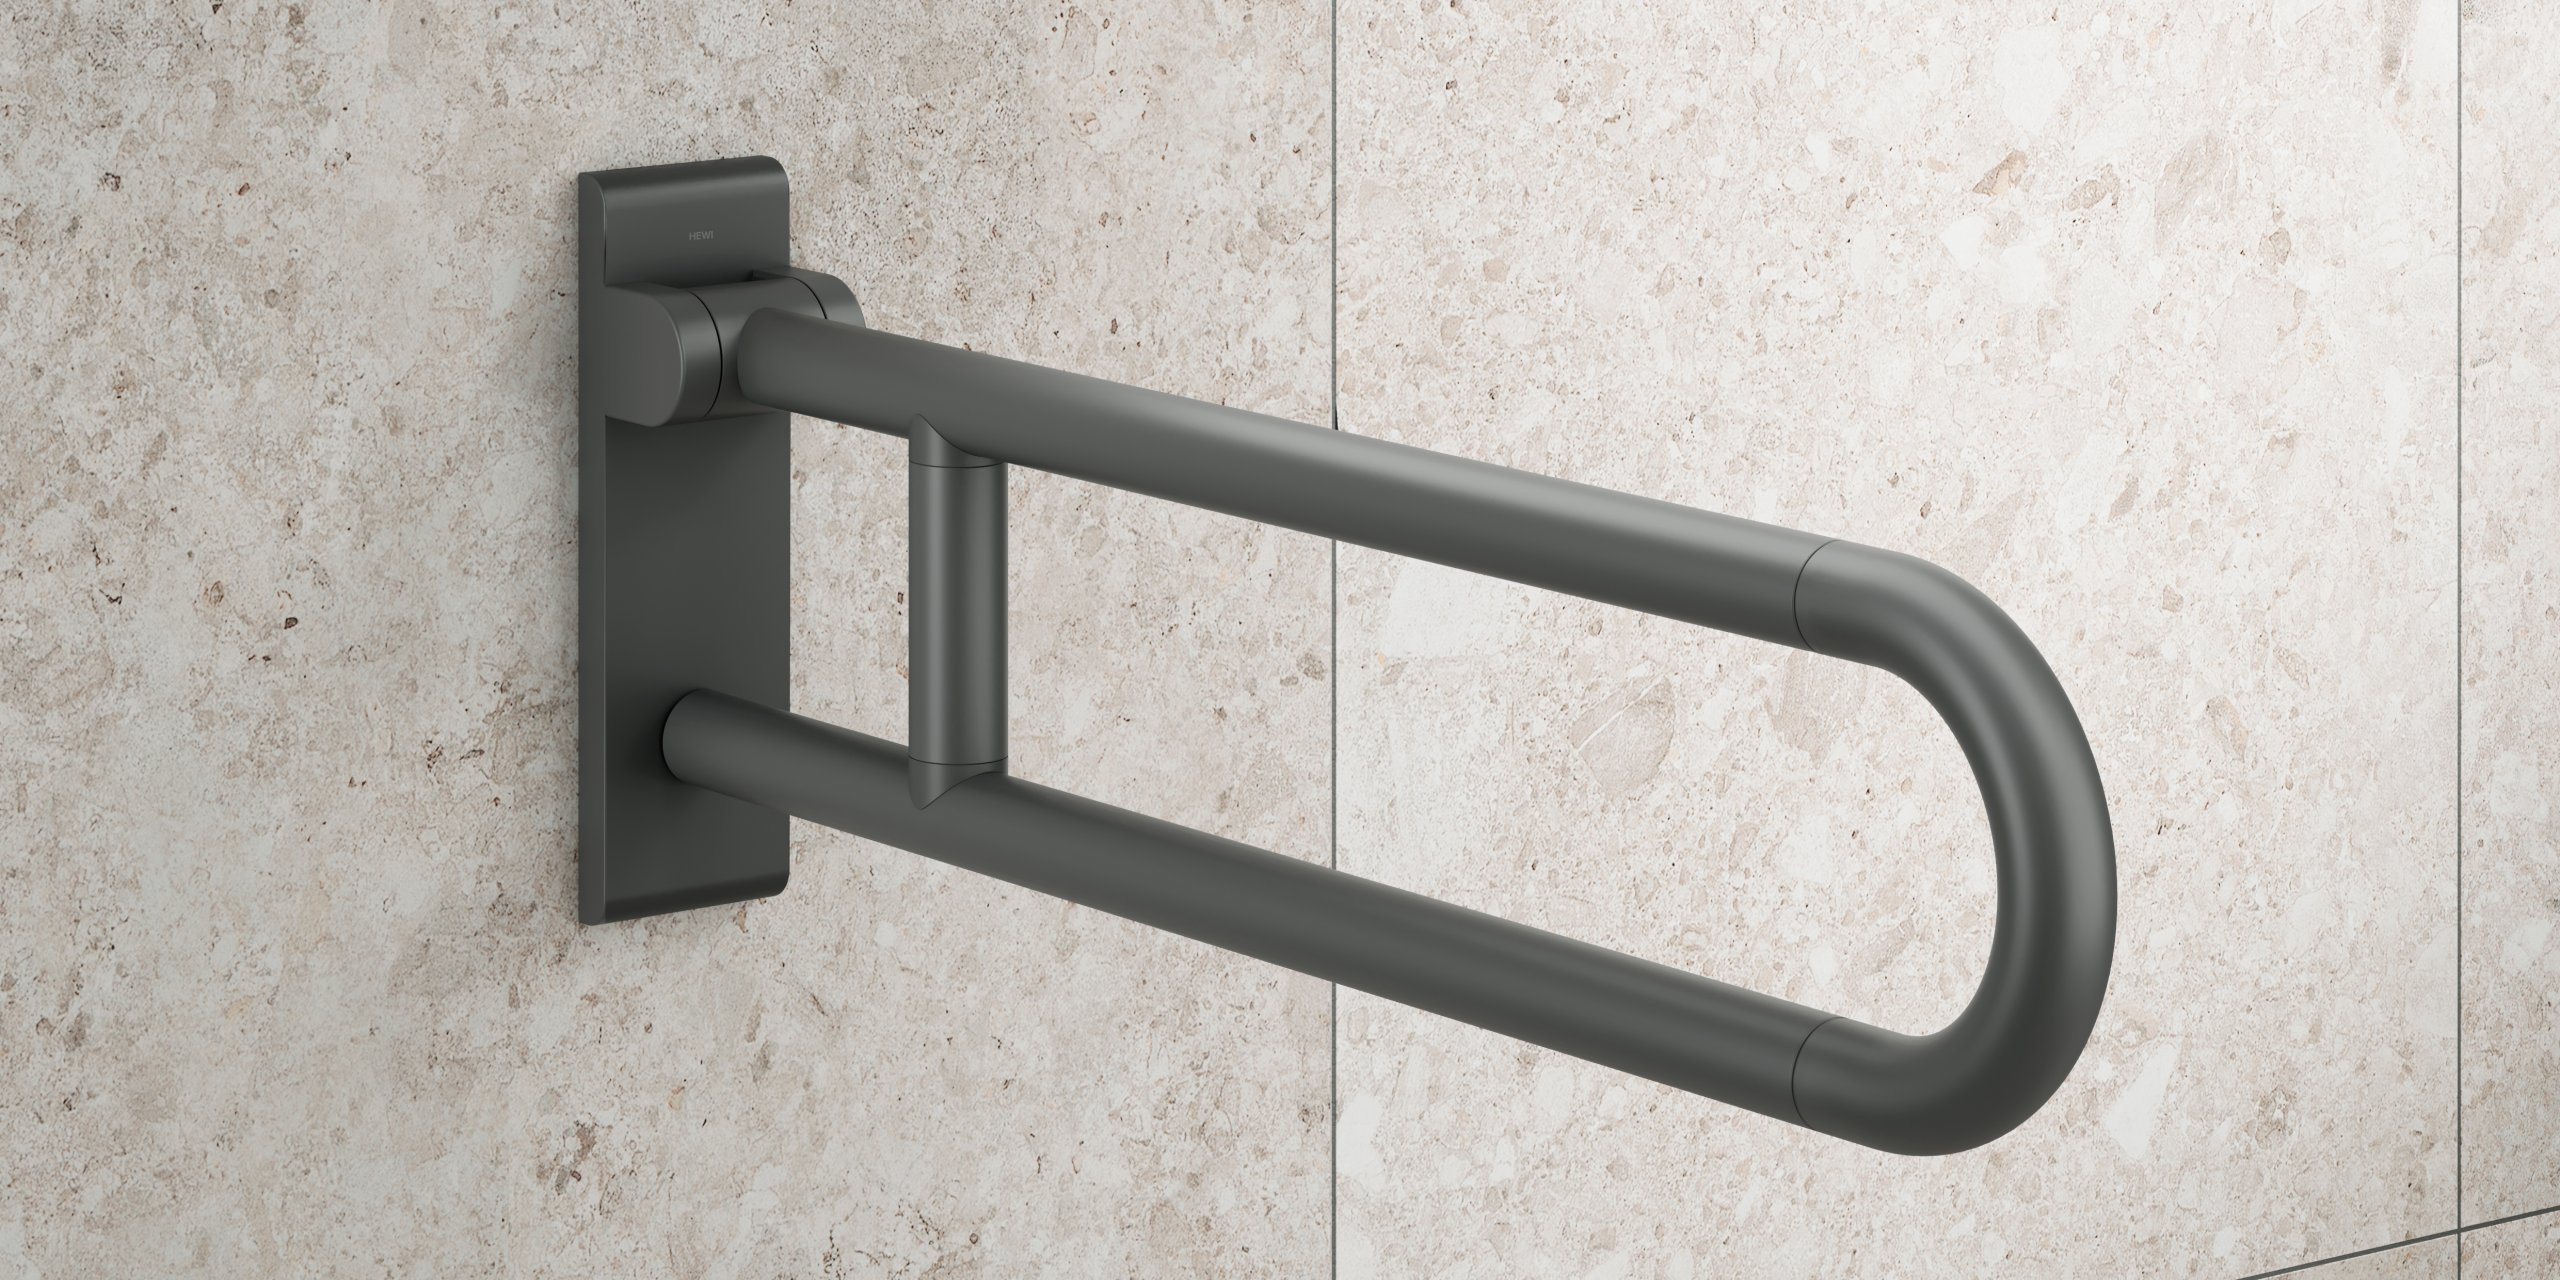 Folding support handle in grey